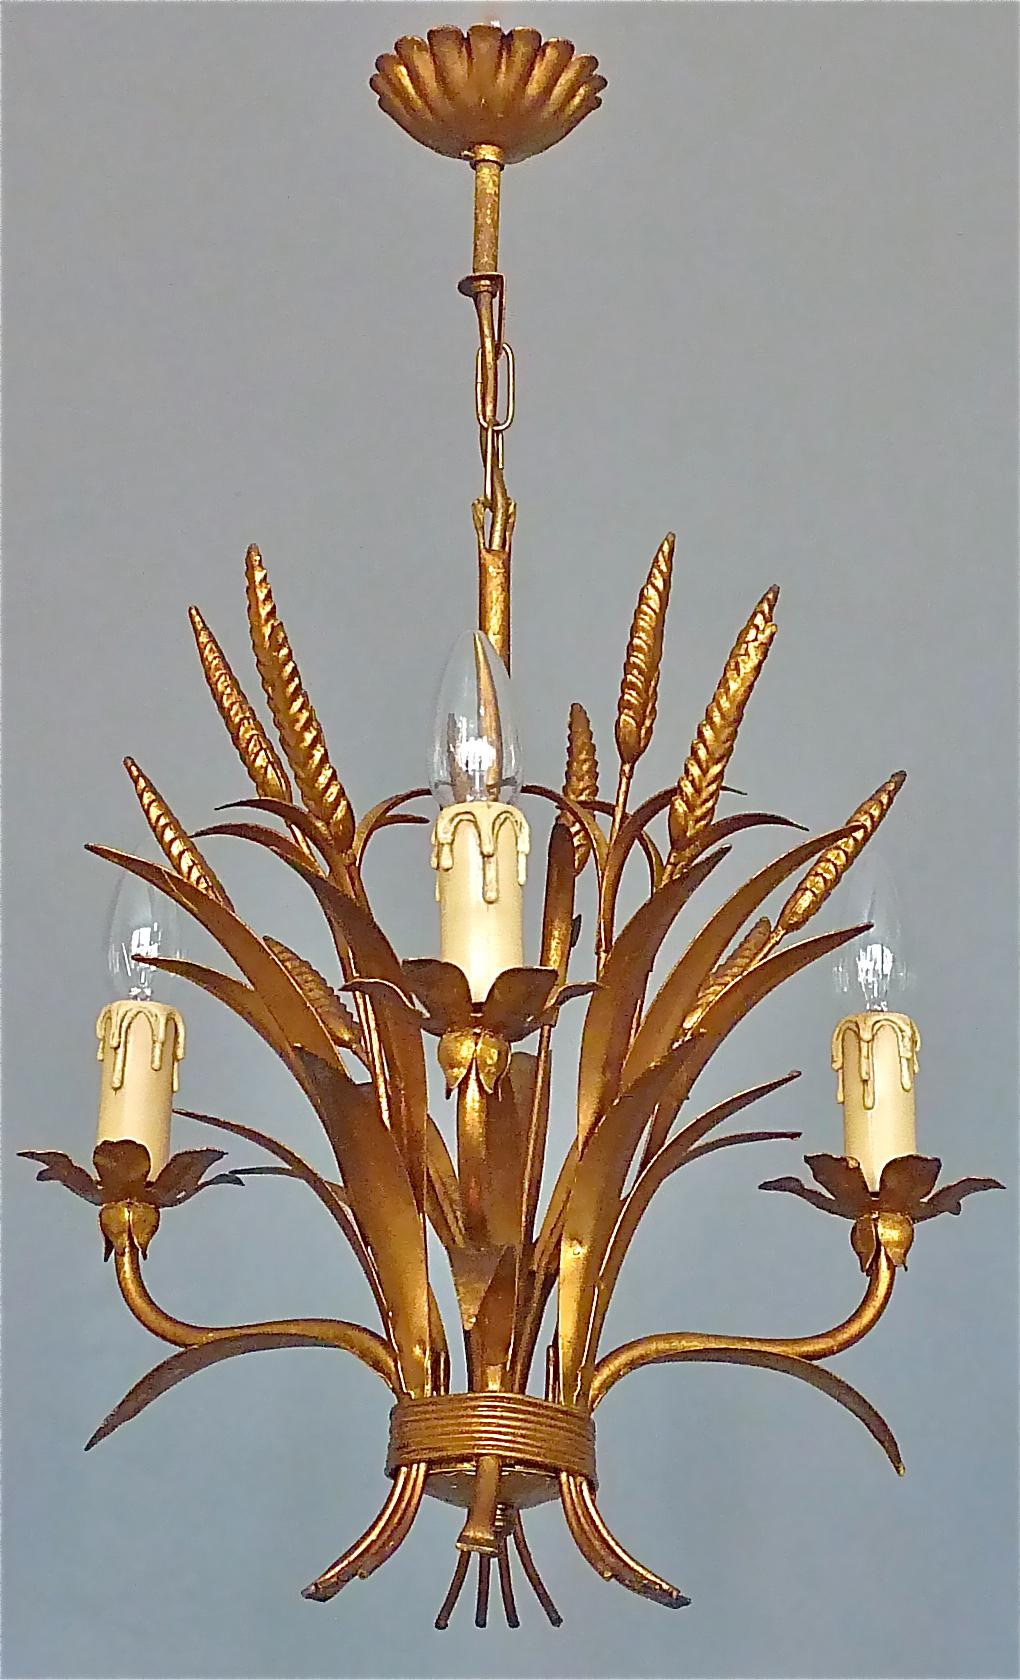 A florentine gilt metal “Coco Chanel” style sheaf of wheat 3-light chandelier which is made in Italy around 1950-60. Coco Chanel had used this sheaf of wheat type as a sculptural side table in her elegant apartment Rue Cambon in Paris. This chain